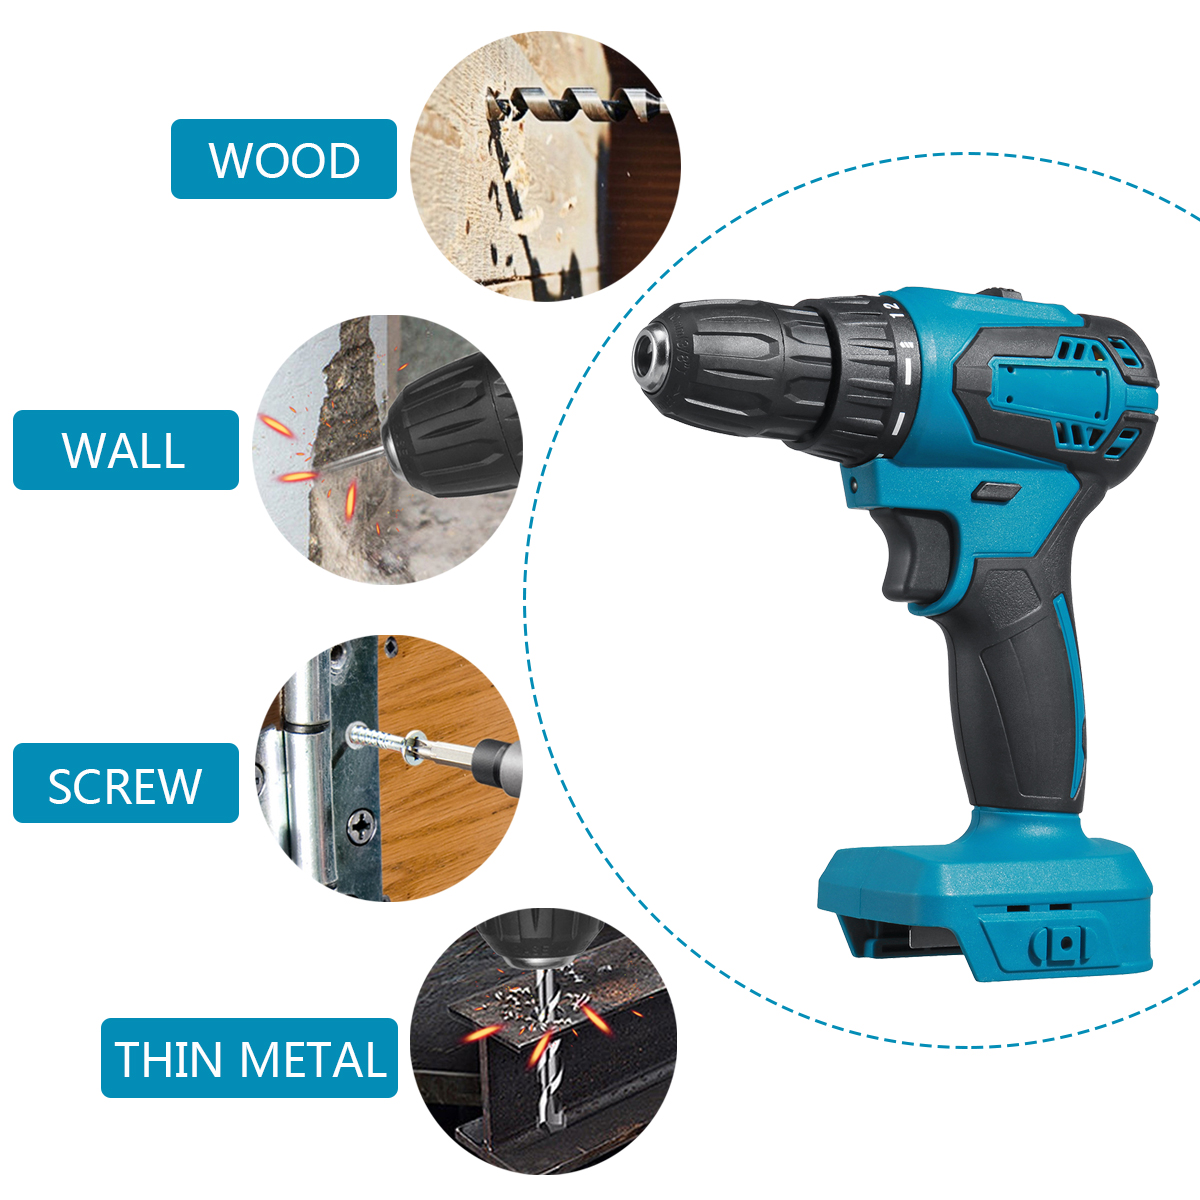 10mm-Rechargable-Electric-Drill-Screwdriver-1350RPM-2-Speed-Impact-Hand-Drill-Fit-Makita-Battery-1882944-5